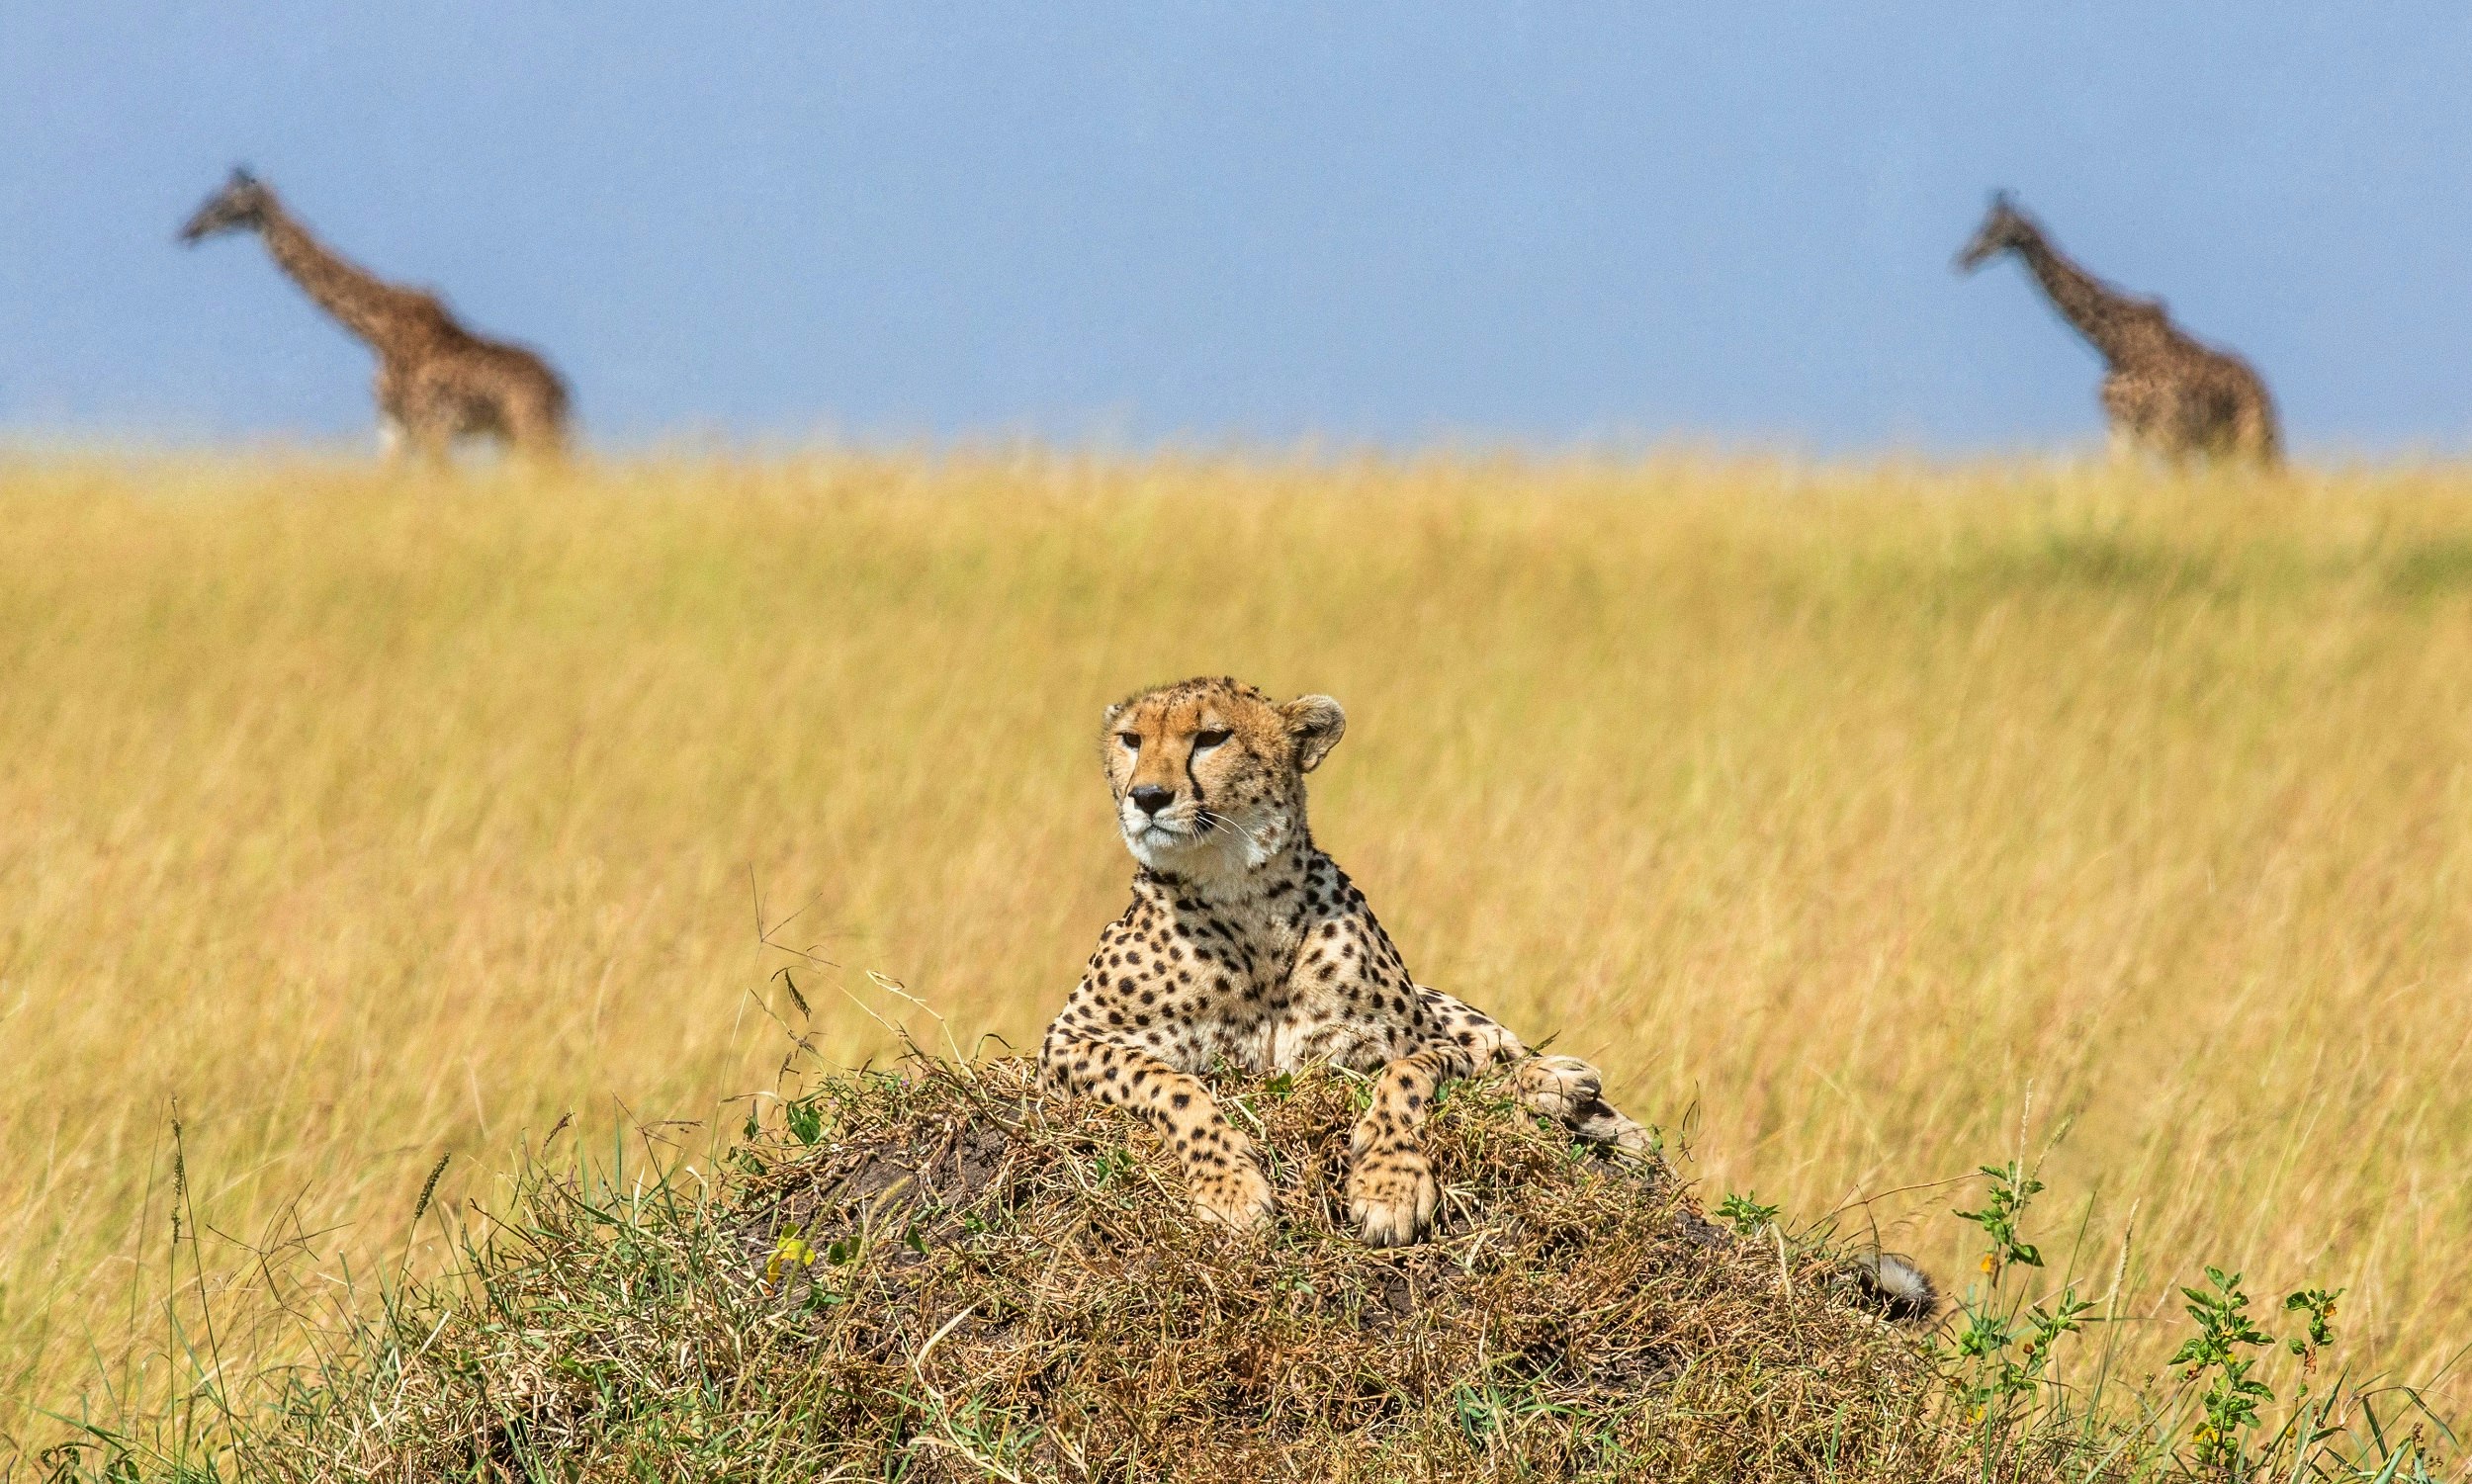 A lone cheetah laying on a termite mound that is sticking up over the long savannah grasses; its front paws are in front of it and its head is raised. In the background are two giraffes.